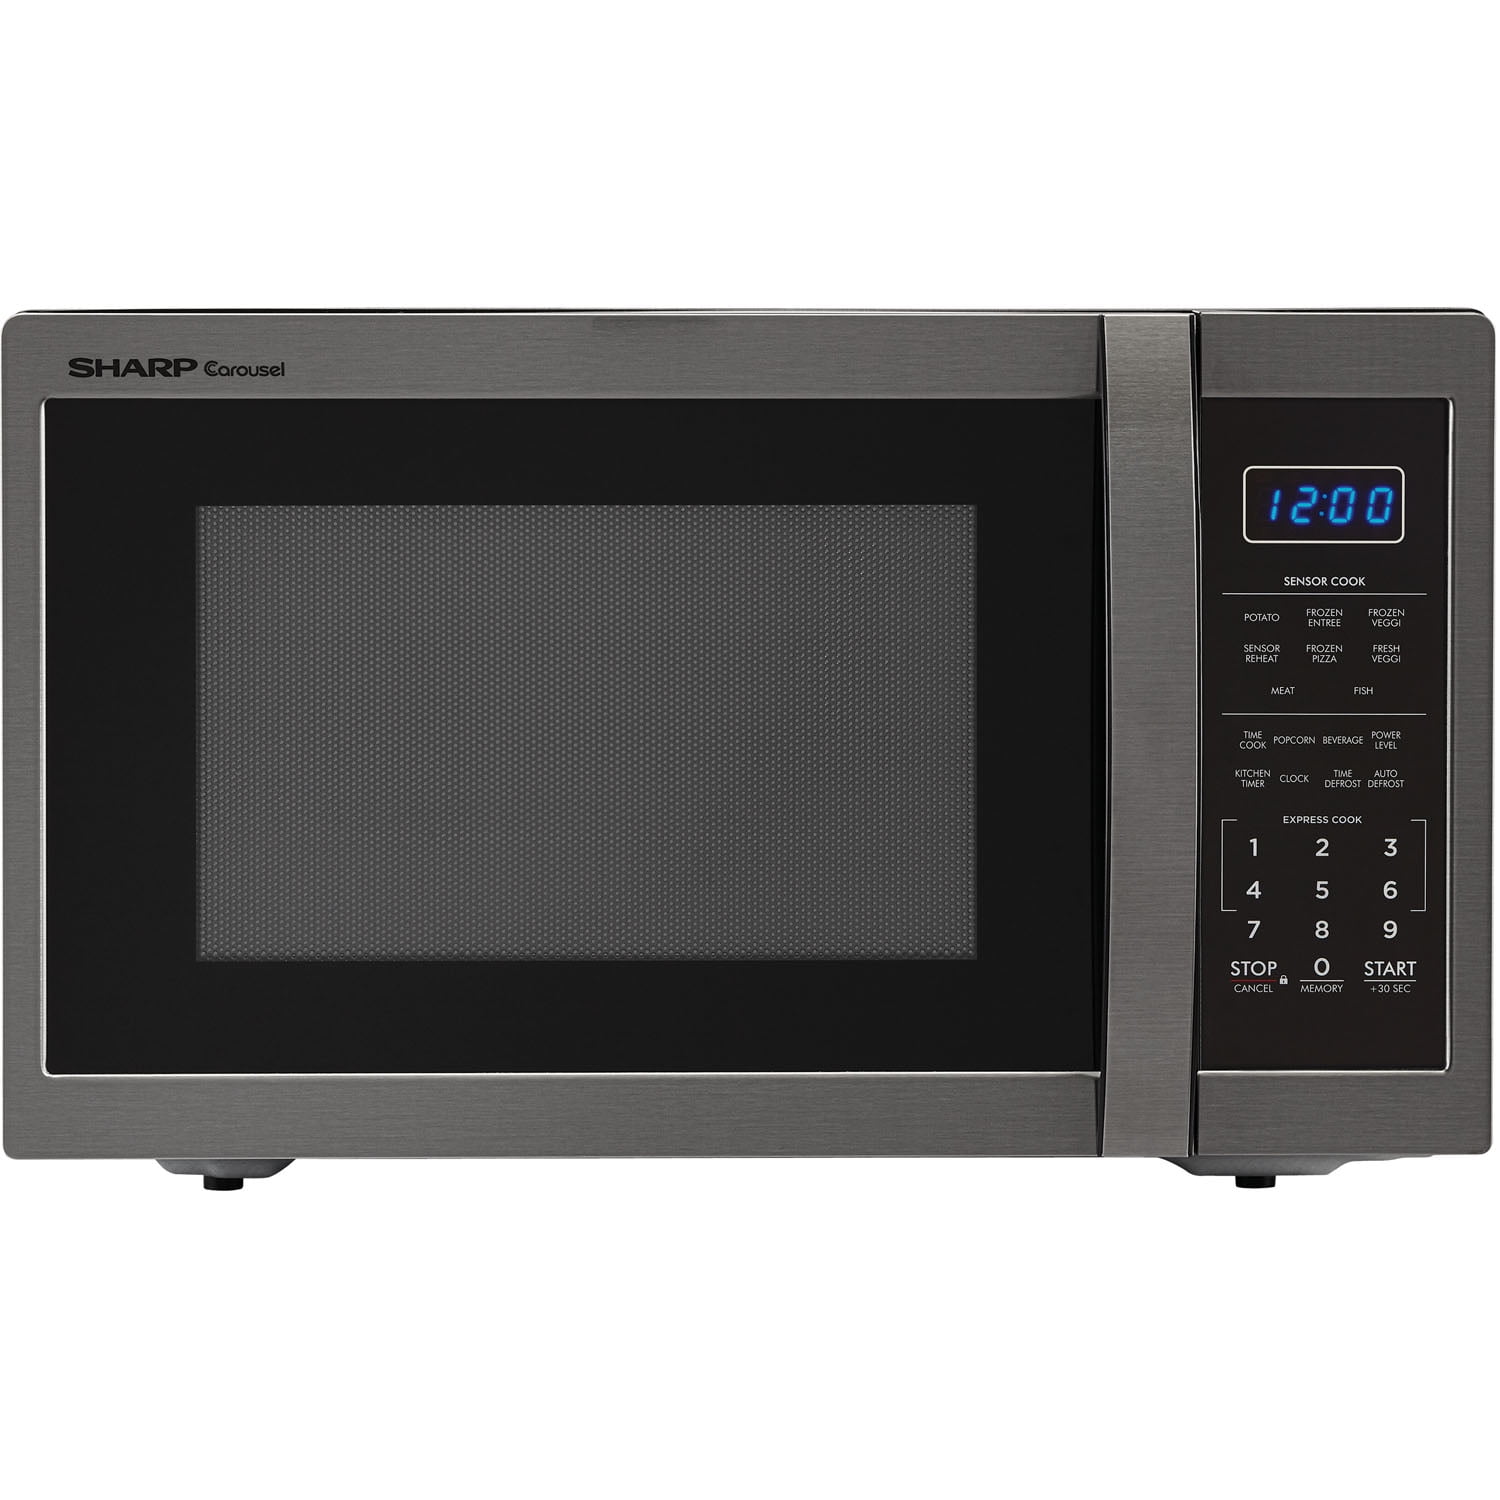 Sharp Carousel 1.4 Cu. Ft. 1100W Countertop Microwave Oven in Black